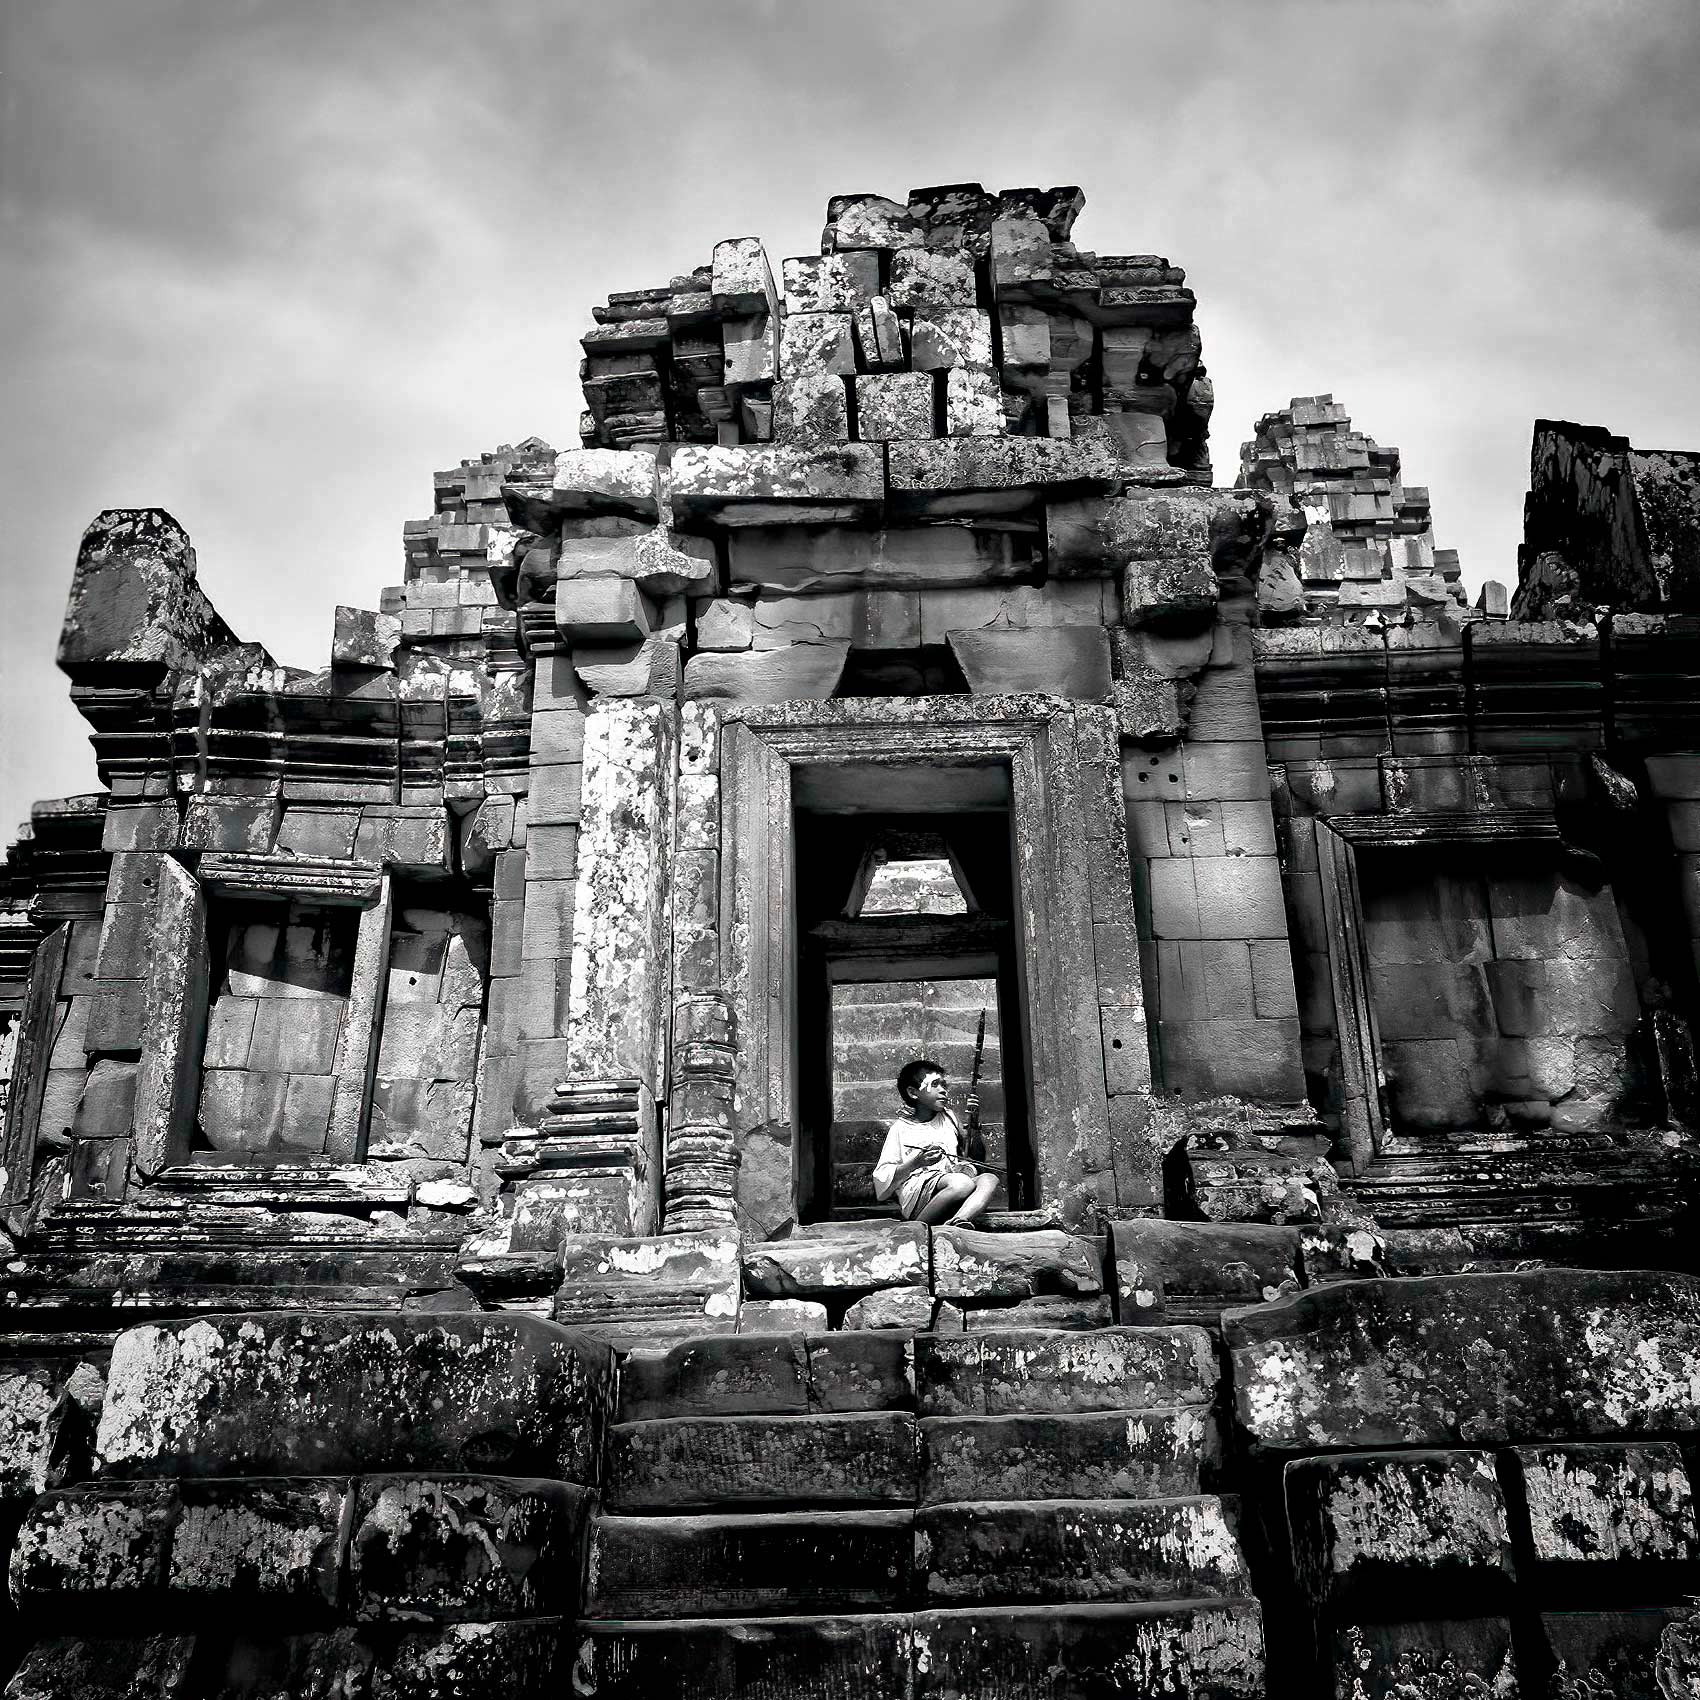 a-young-boy-plays-an-erhu-as-he-busks-for-money-on-the-stairs-of-a-temple-in-angkor-wat